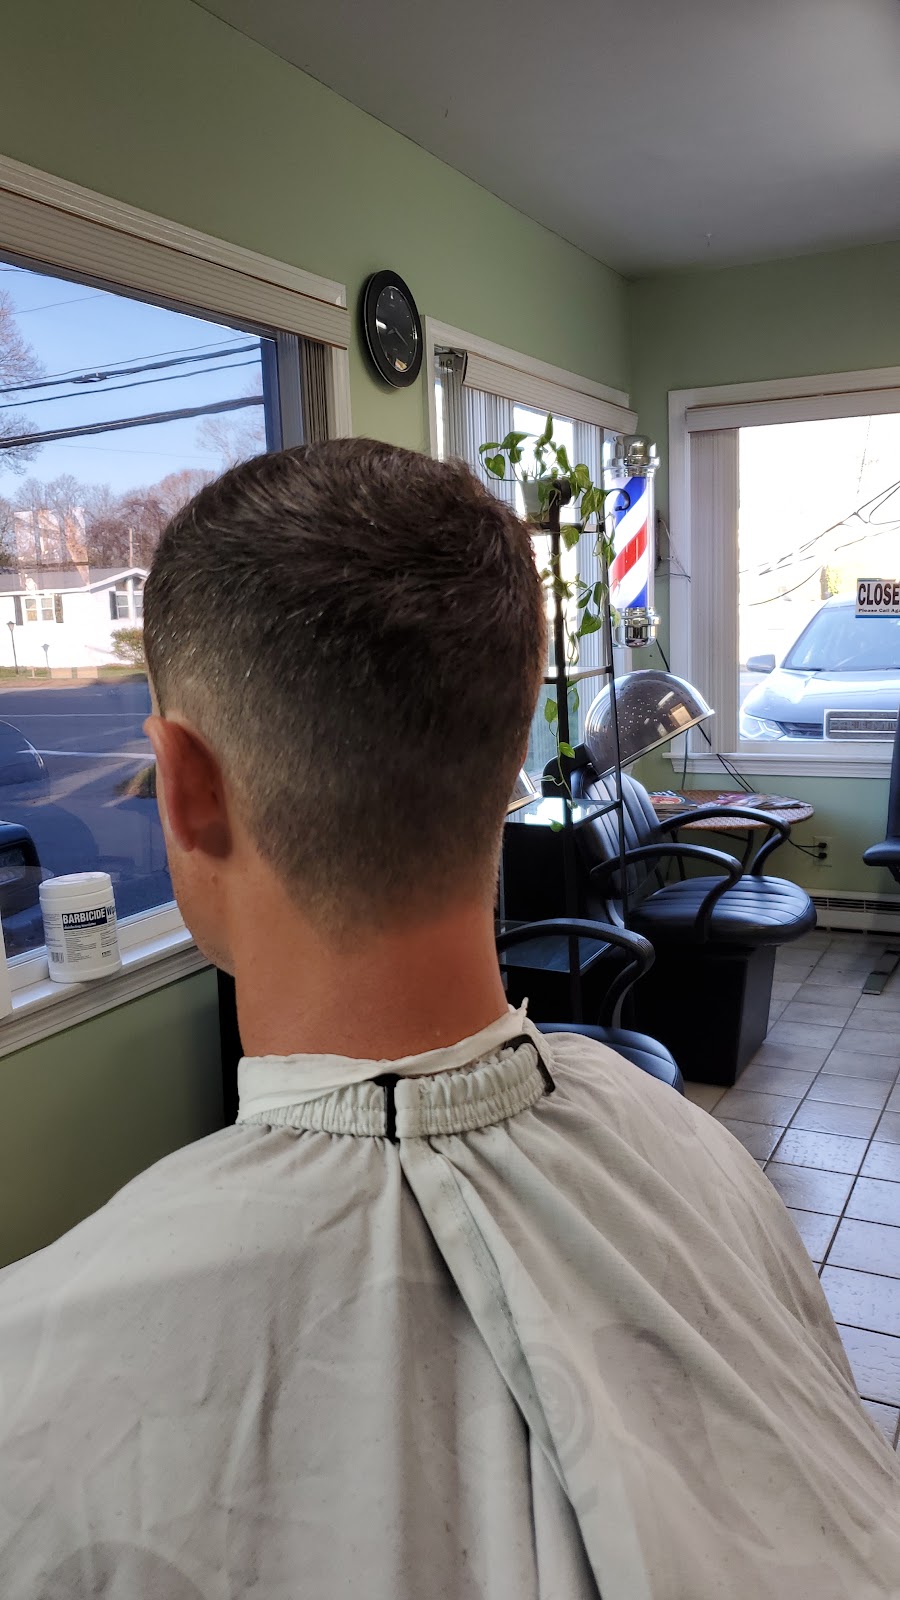 Legacy Barber & Company | 21 Boston Post Rd, Westbrook, CT 06498 | Phone: (860) 669-6644